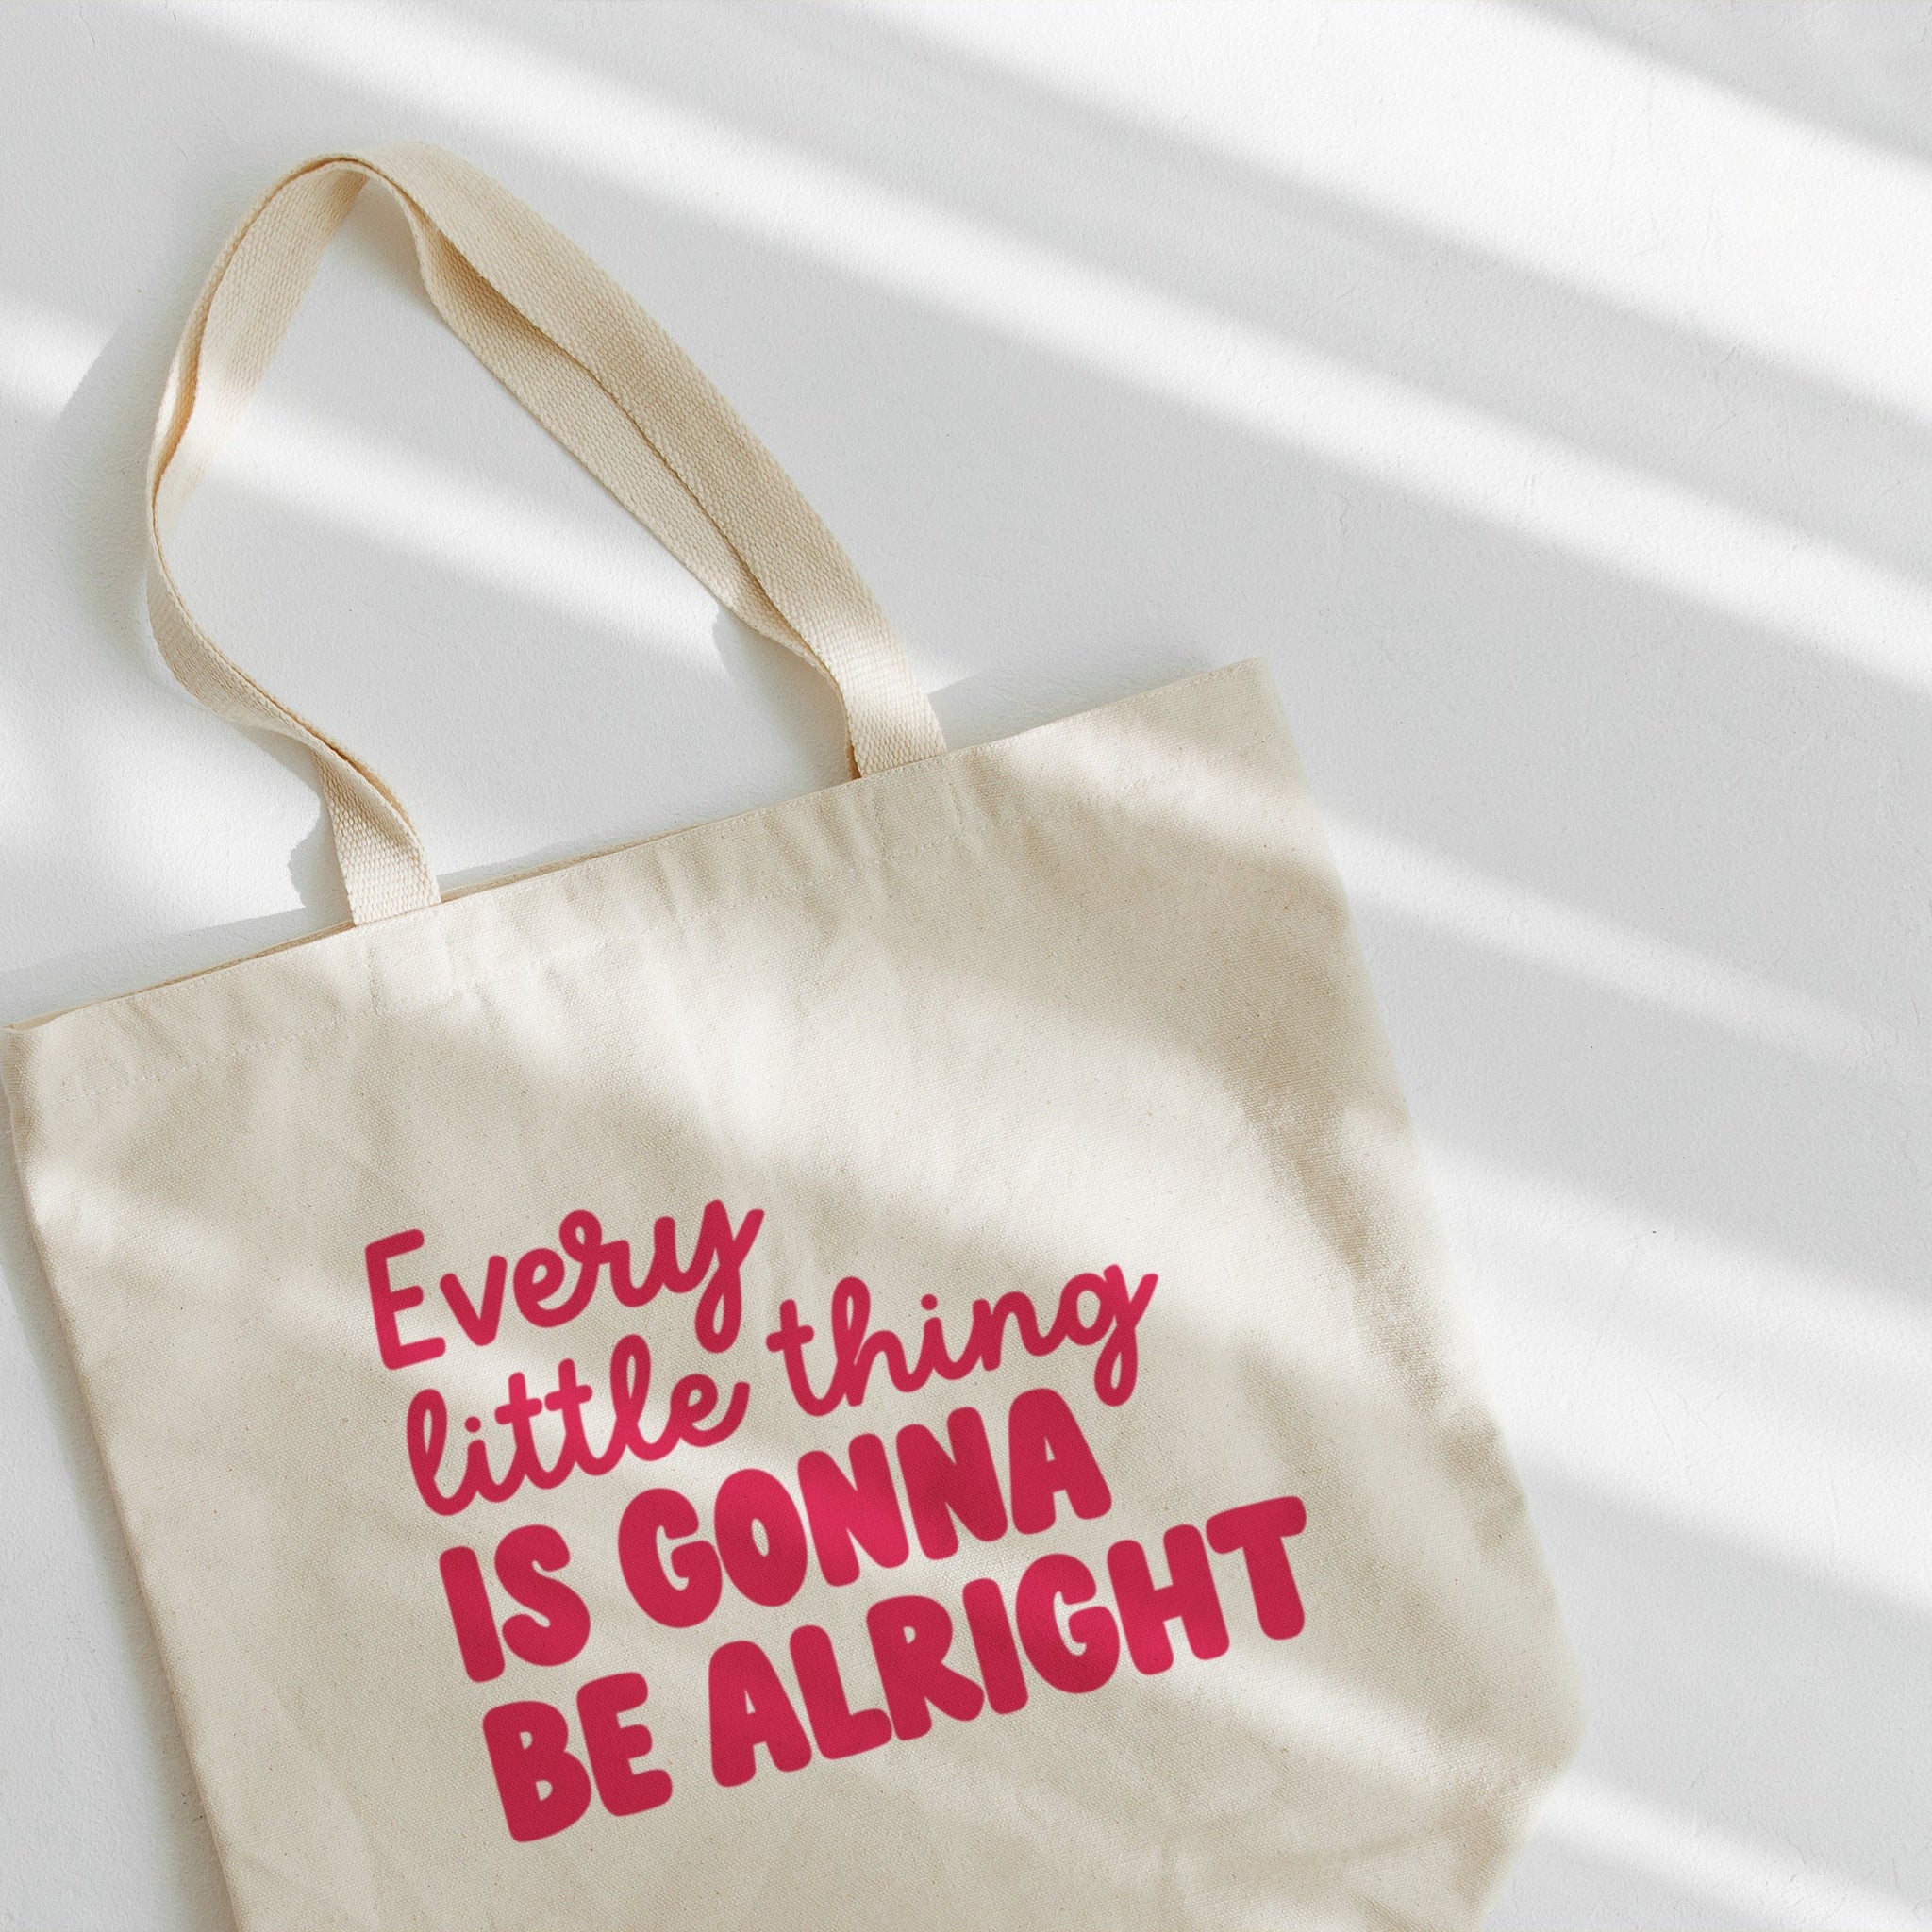 'Every Little Thing Is Gonna Be Alright' tote bag